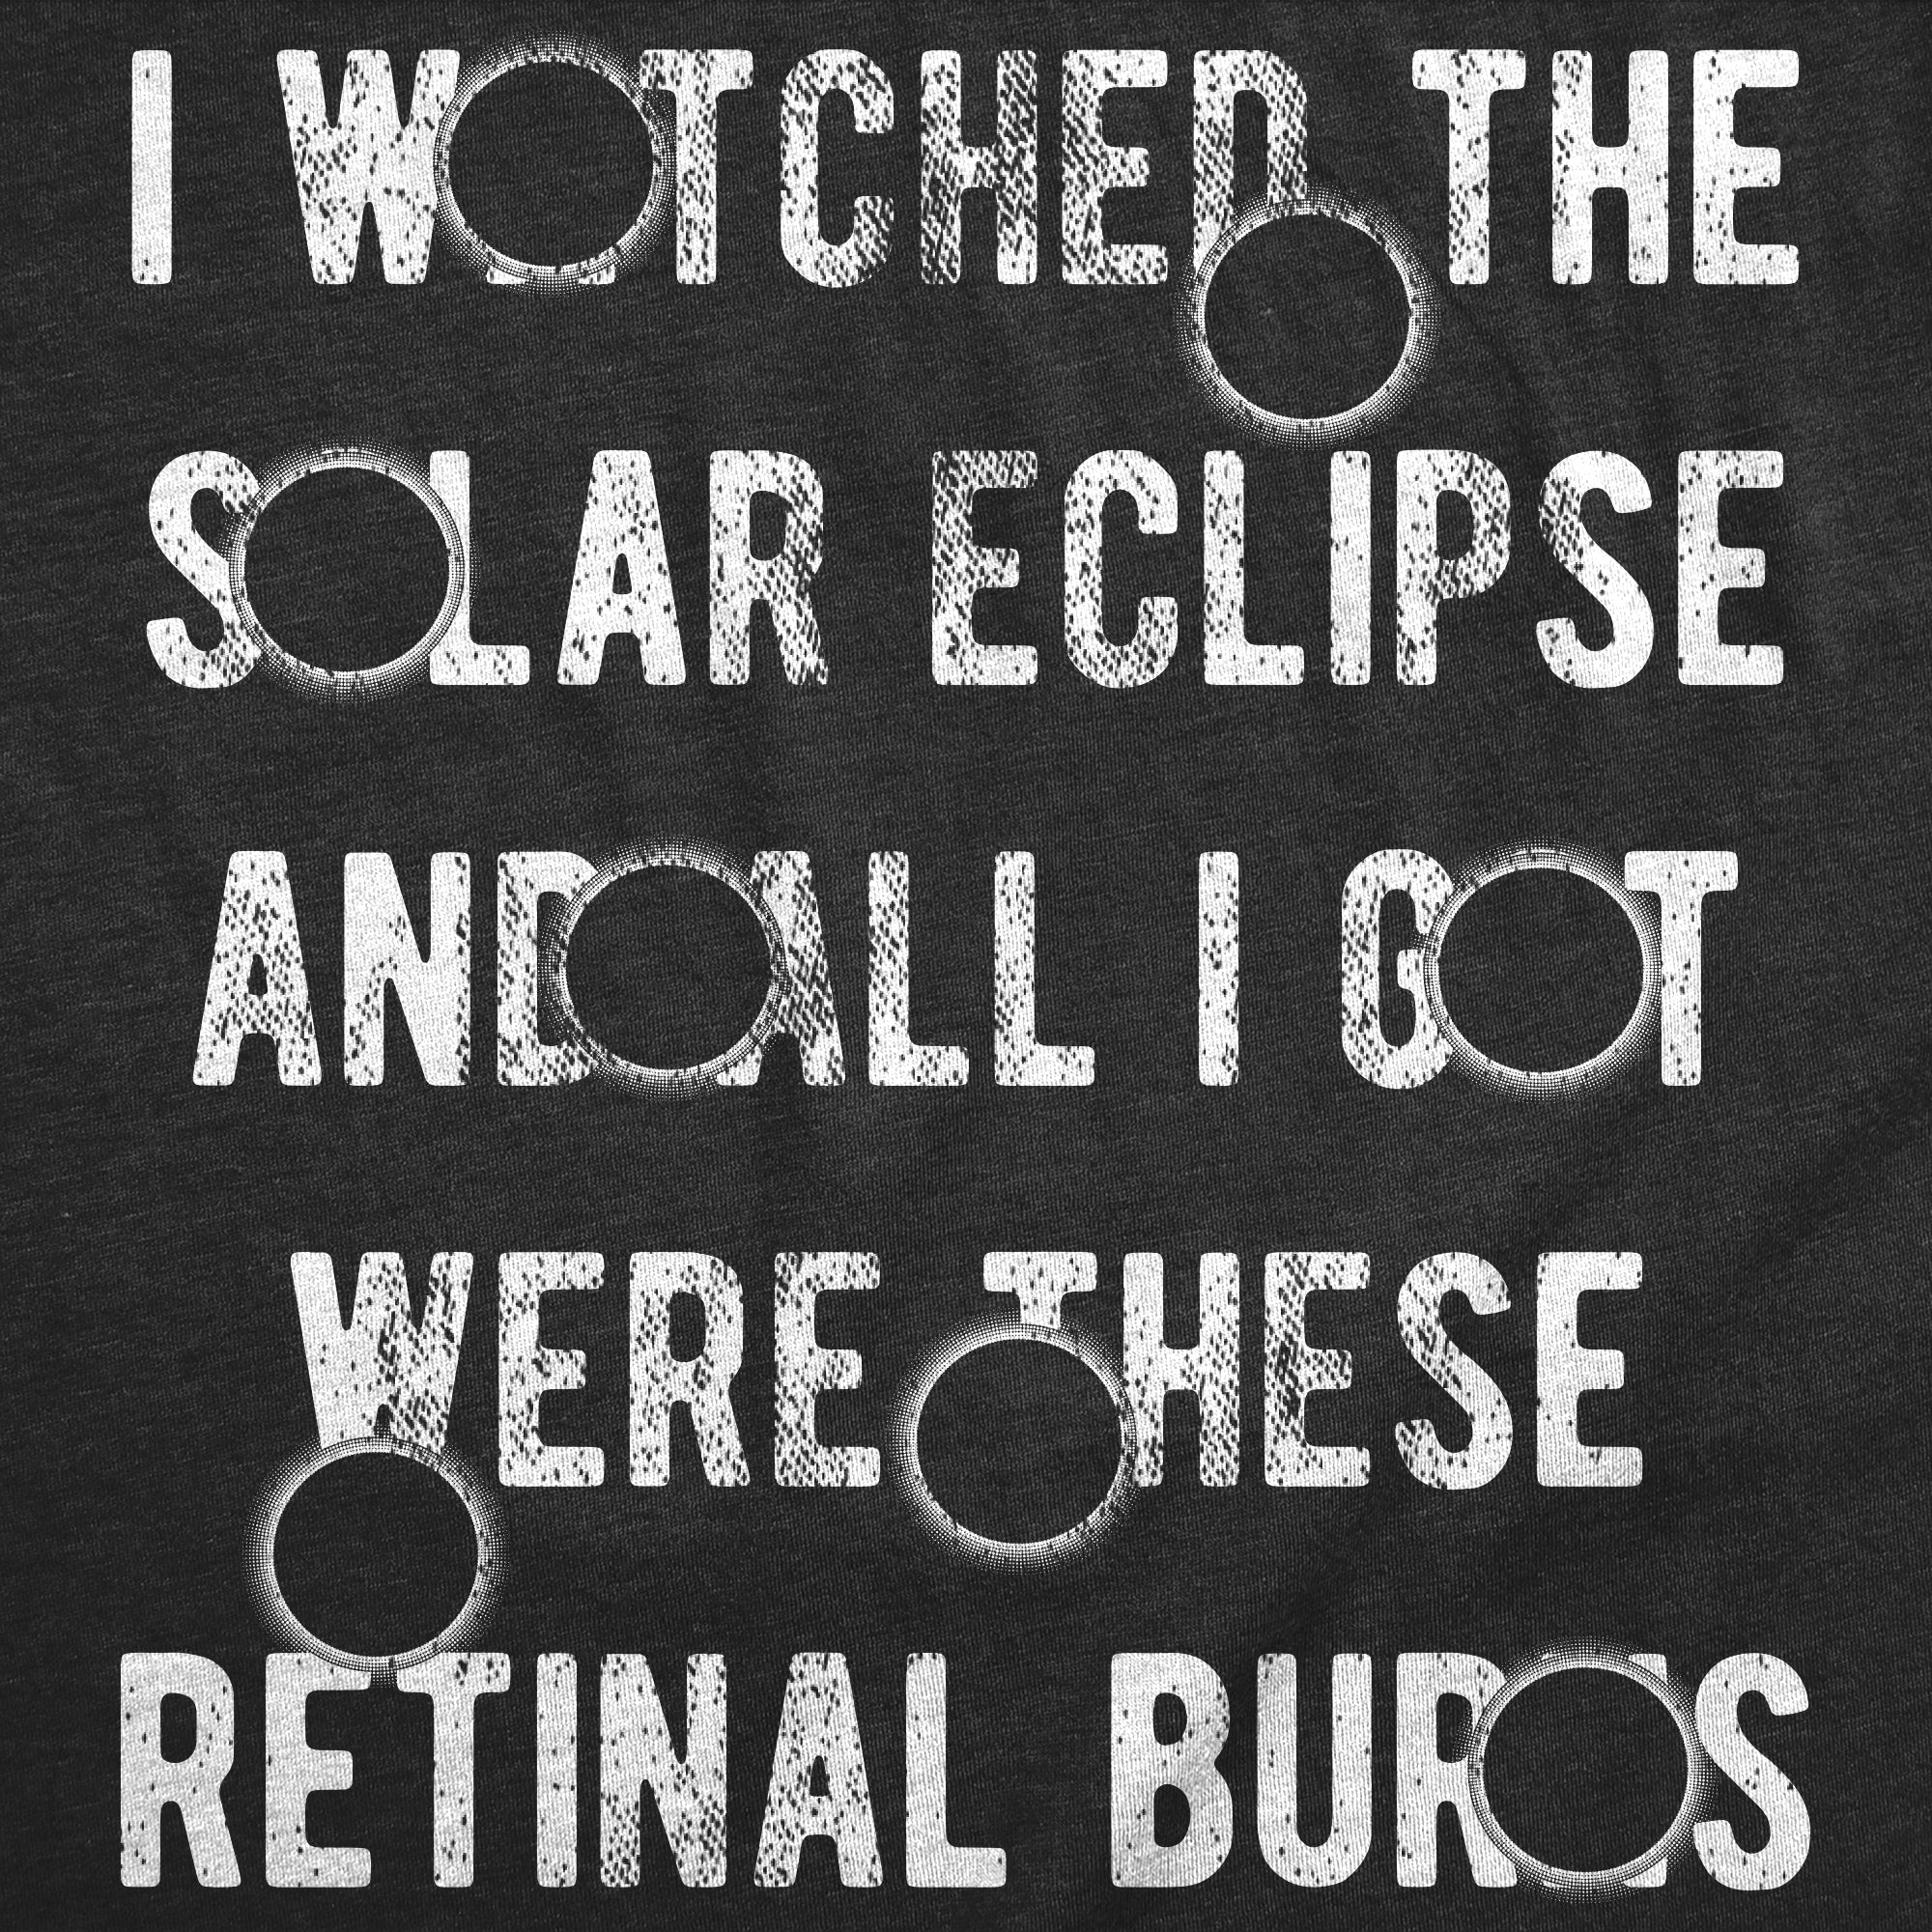 Funny Heather Black - Retinal Burns I Watched The Solar Eclipse And All I Got Were These Retinal Burns Womens T Shirt Nerdy sarcastic Tee